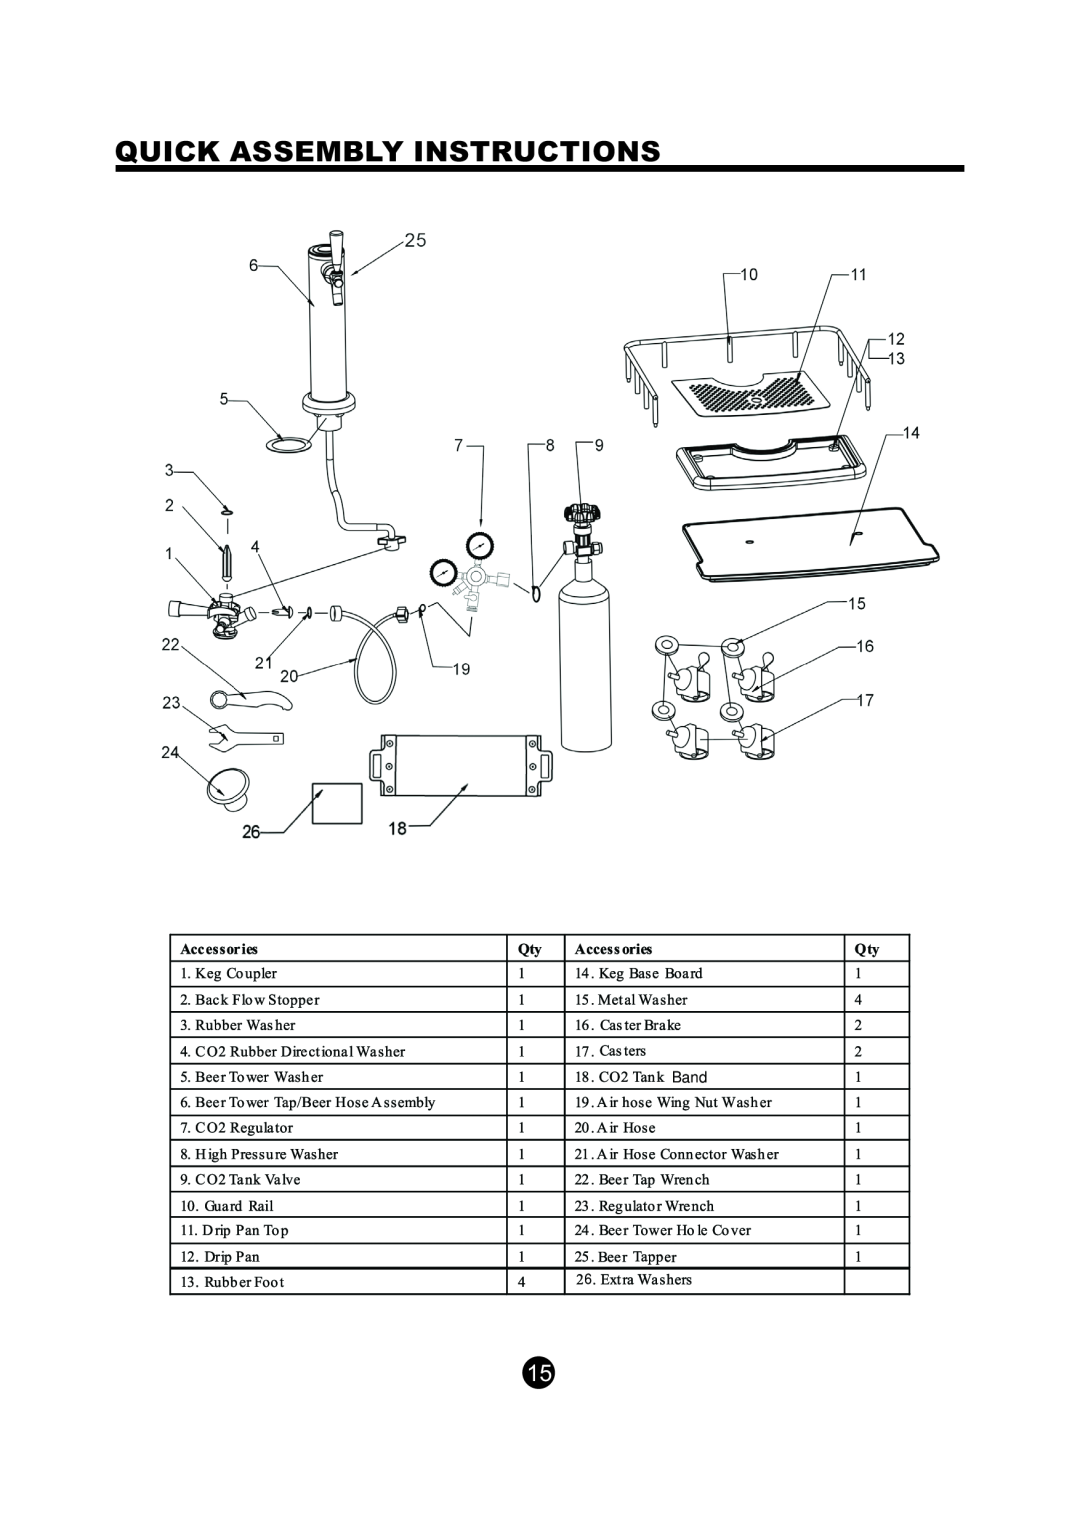 NewAir AK-200 owner manual Quick Assembly Instructions, Band 